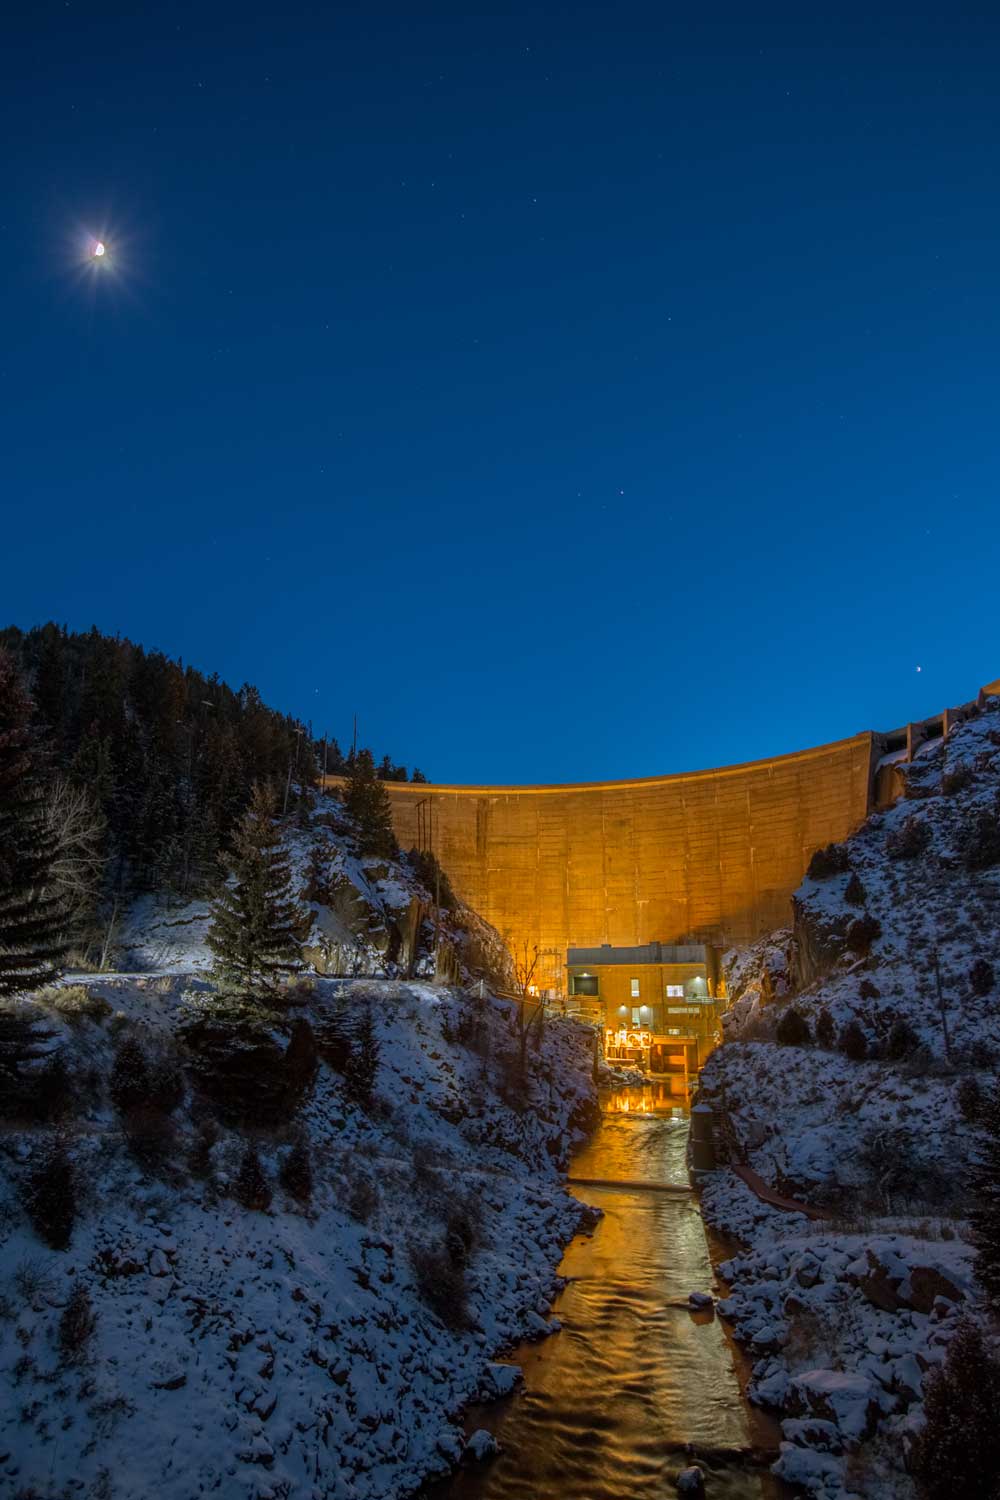 Denver Water’s system has seven hydroelectric plants, including one at Williams Fork Dam (above). The plants produced more than 71 million kilowatt hours of energy in 2017, more than enough to meet the power demands of all of Denver Water’s facilities, from pump stations to treatment plants.